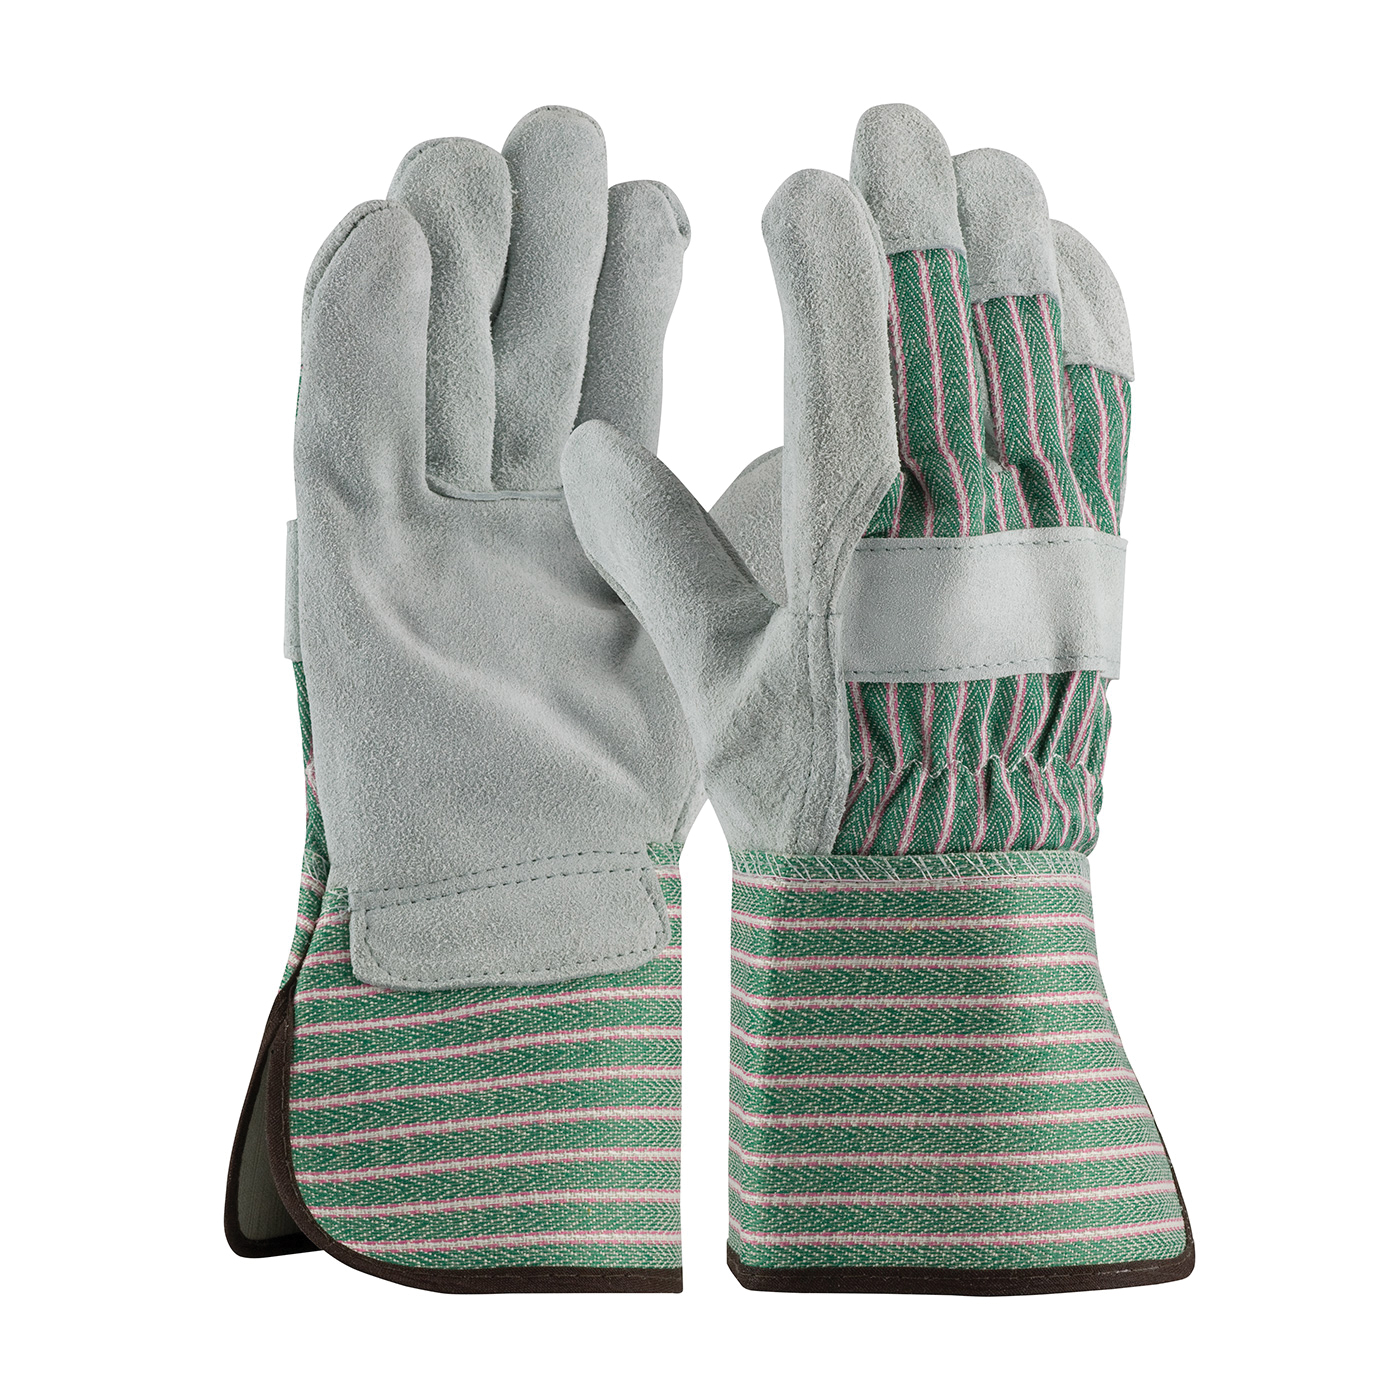 PIP® 83-6663/L Bronze 83-6663 B-Grade General Purpose Gloves, Leather Palm, Gunn Cut with Wing Thumb Style, L, Shoulder Split Cowhide Leather Palm, 75% Cowhide Leather/25% Cotton, Green/Gray/Pink, Gauntlet/Rubberized Cuff, Uncoated Coating, Cotton Lining